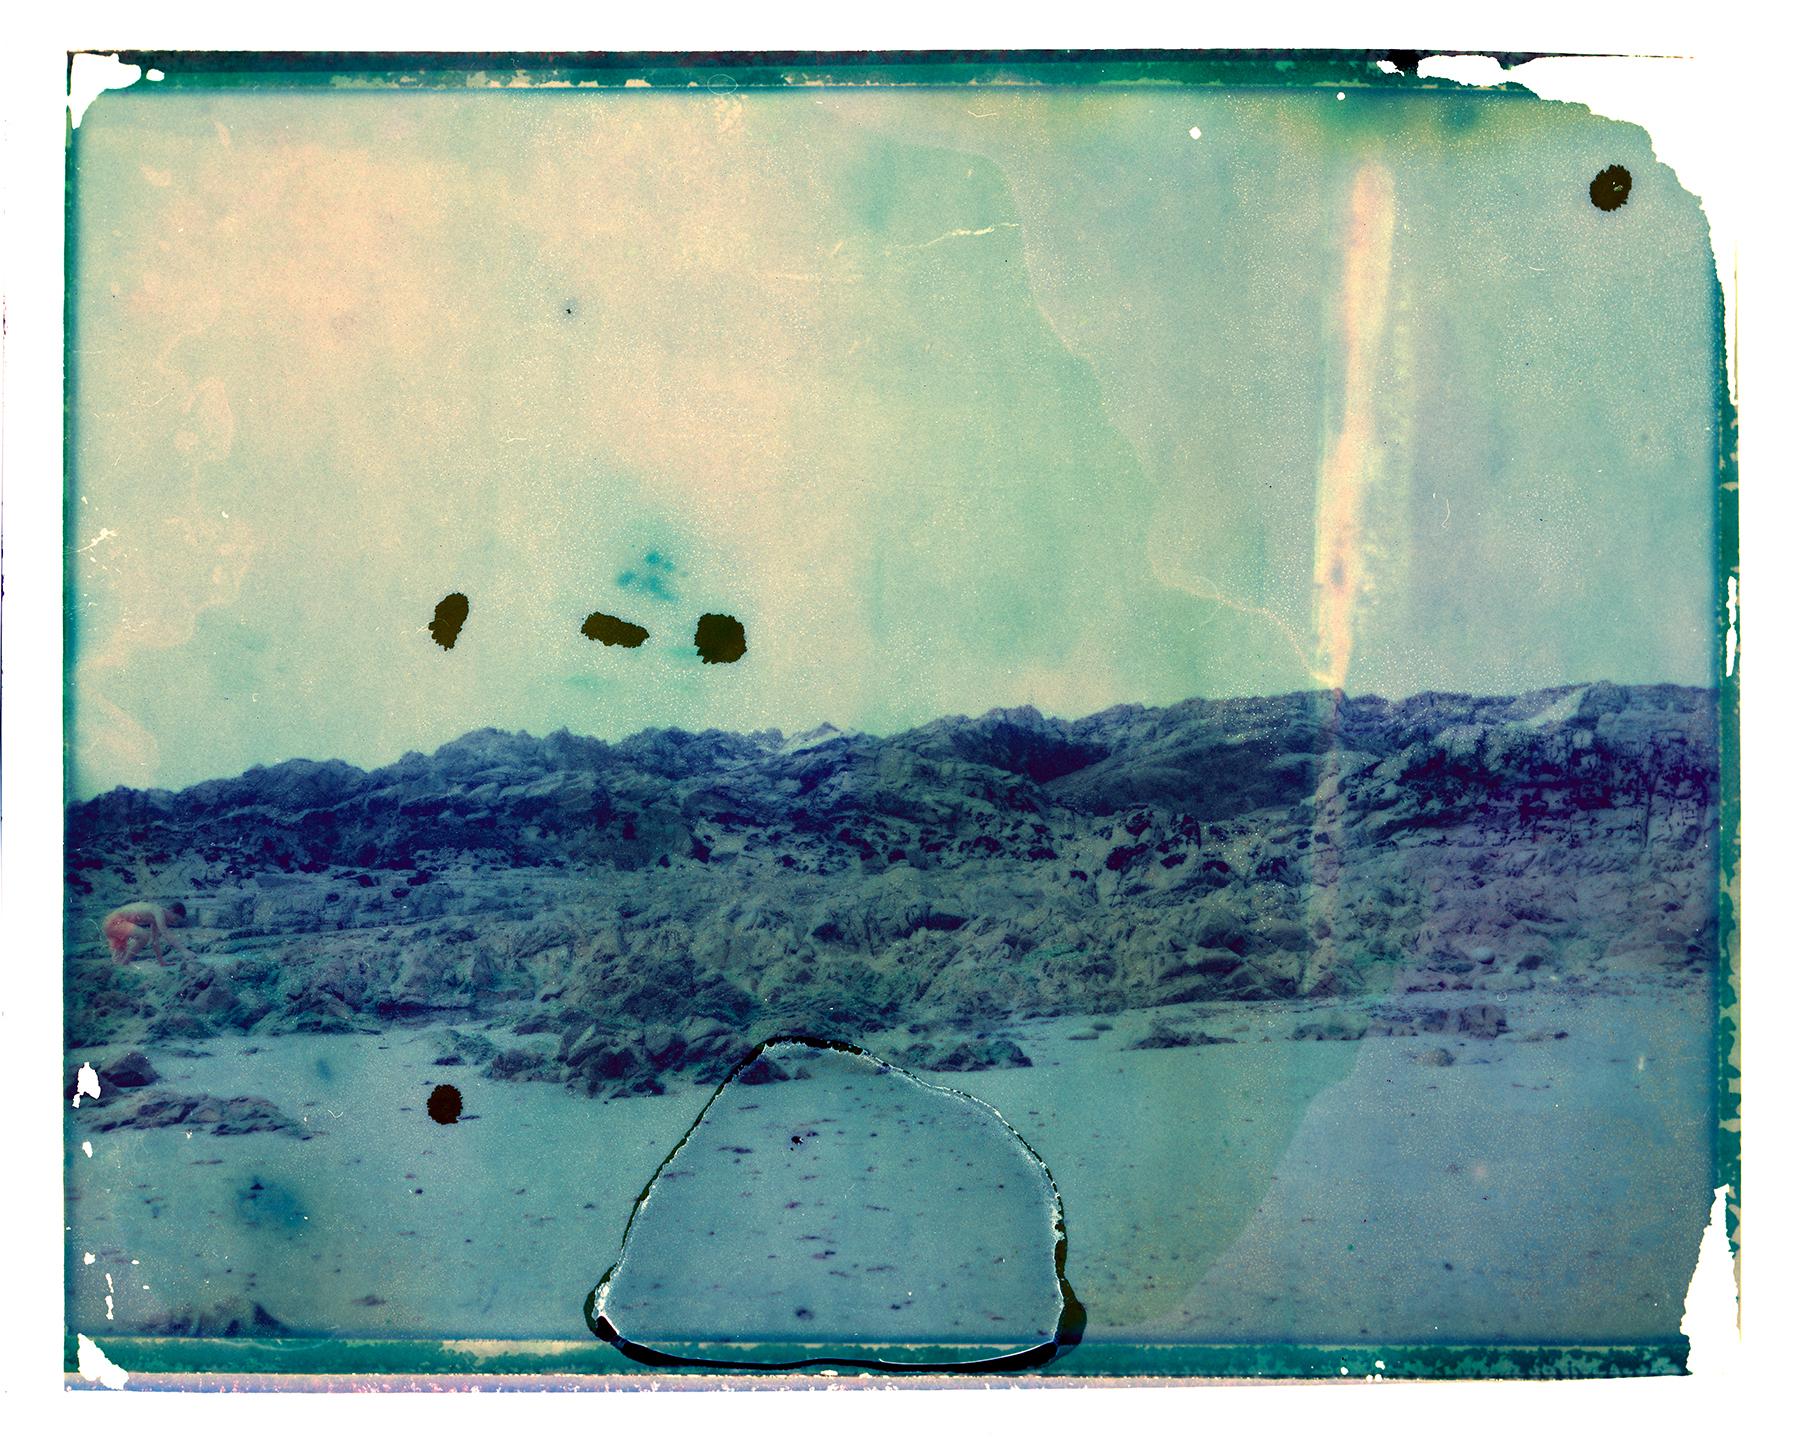 Journey to the center of the Earth - Contemporary, Polaroid, Childhood